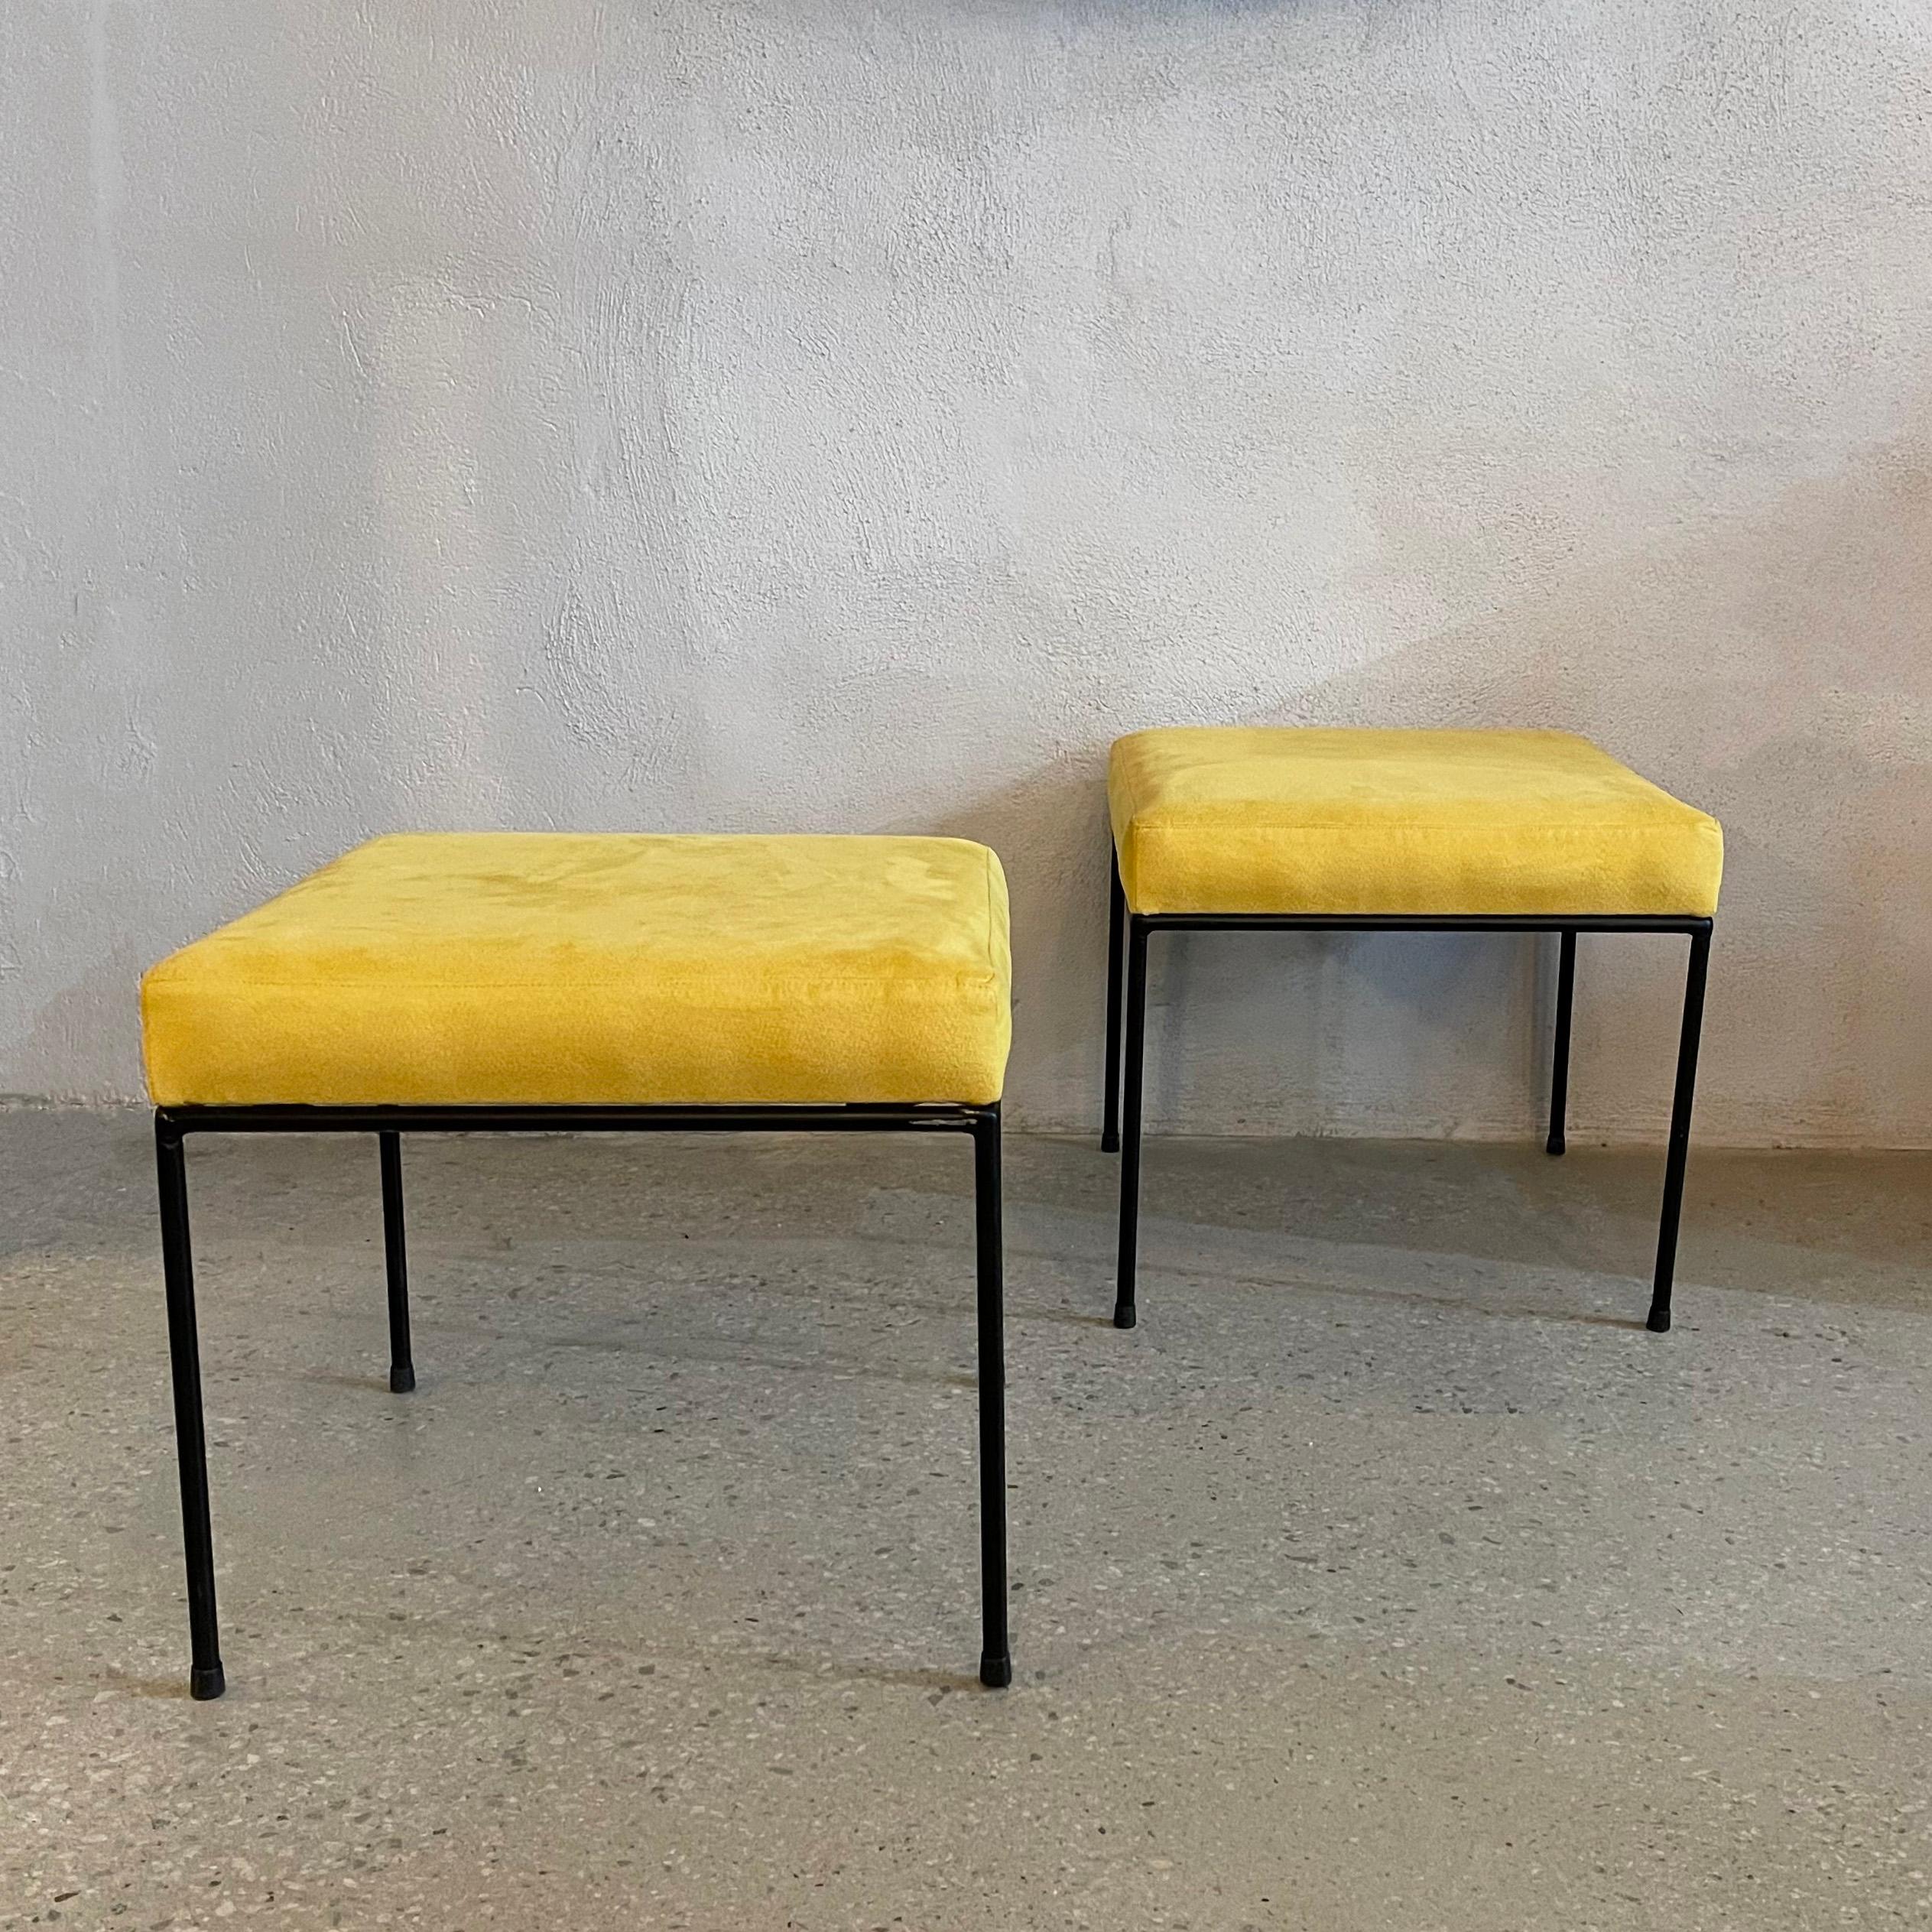 Minimal Mid-Century Modern Wrought Iron And Ultrasuede Ottomans 1